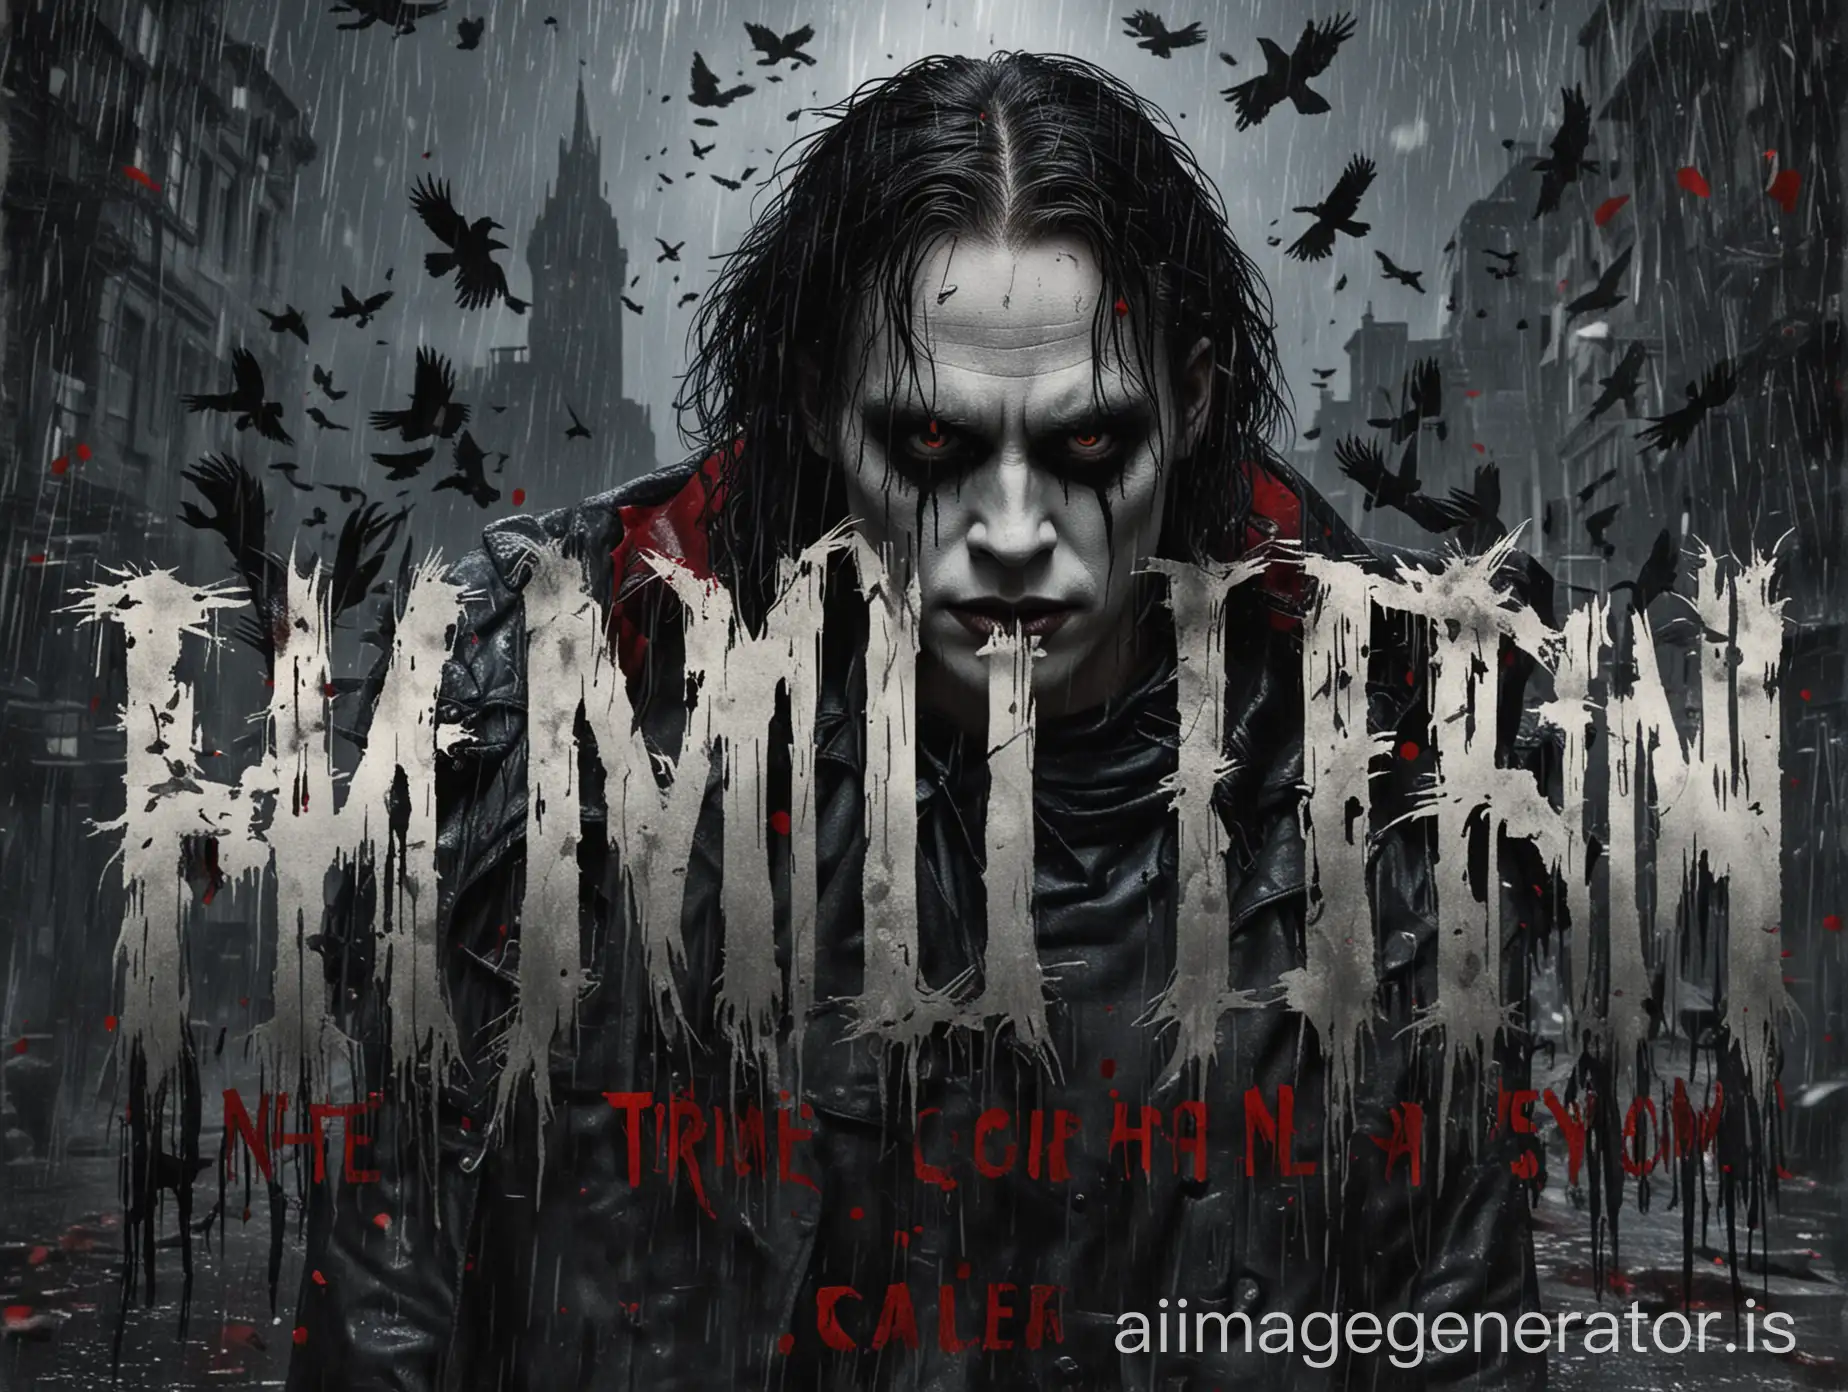 Create a YouTube thumbnail for 'The Crow' featuring Bill Skarsgård. Use a dark, moody color palette (black, gray, red). Show Bill Skarsgård as Eric Draven with iconic face paint, highlighting his intense eyes. Use a gothic cityscape background with a hint of rain. Add the movie title 'The Crow' in bold, white, grunge-textured letters, ensuring it stands out. Optionally, include a crow silhouette or feather for added thematic detail.